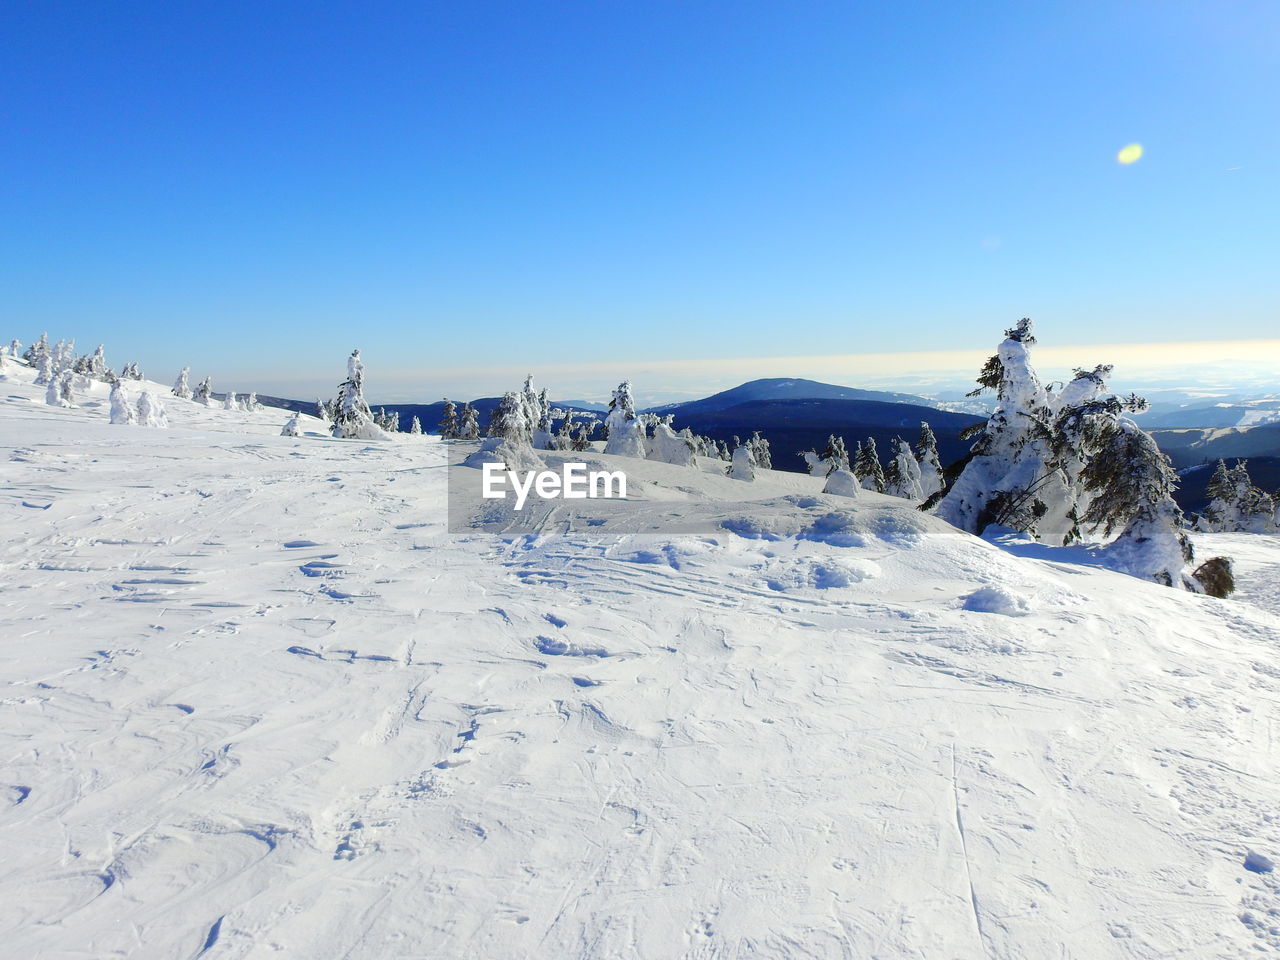 SCENIC VIEW OF SNOW COVERED LANDSCAPE AGAINST CLEAR SKY